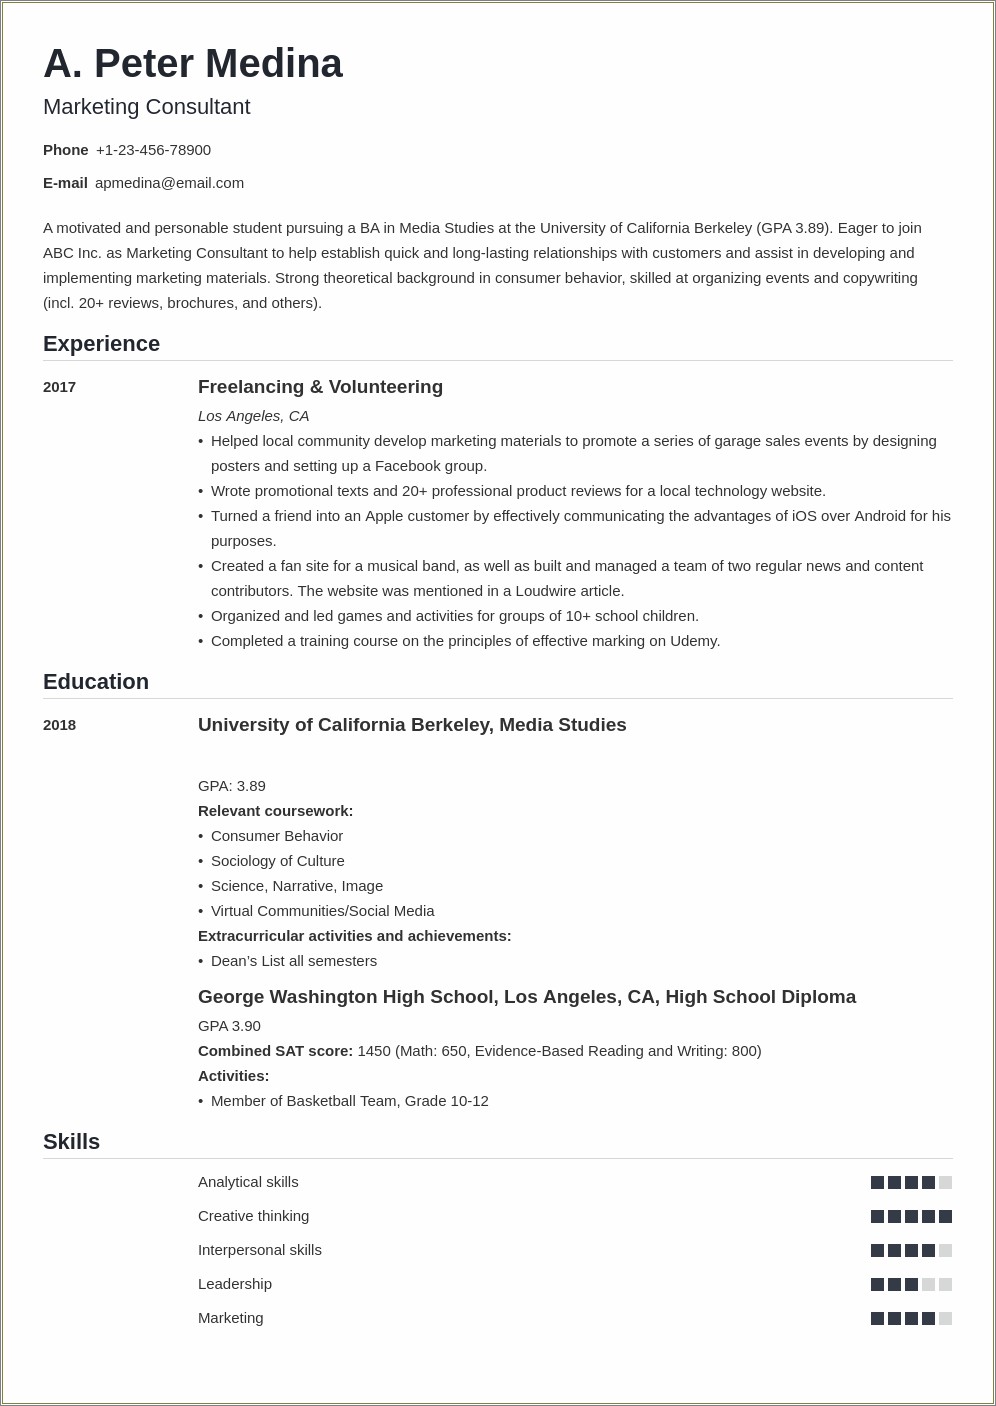 Data Entry Resume Headline For No Experience